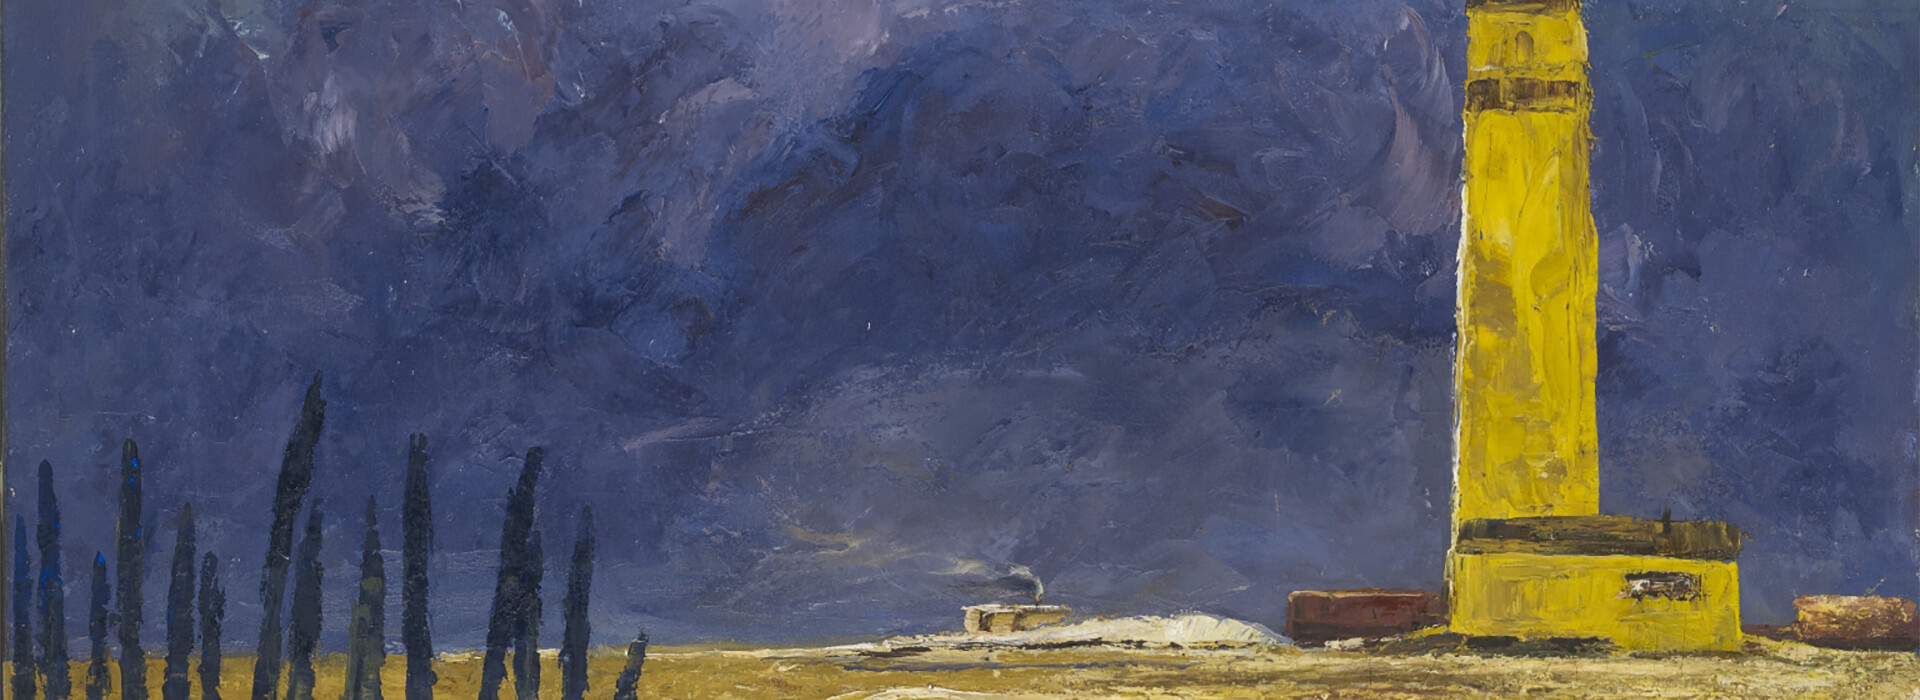 Painting of a prairie scene with a grain silo and a train